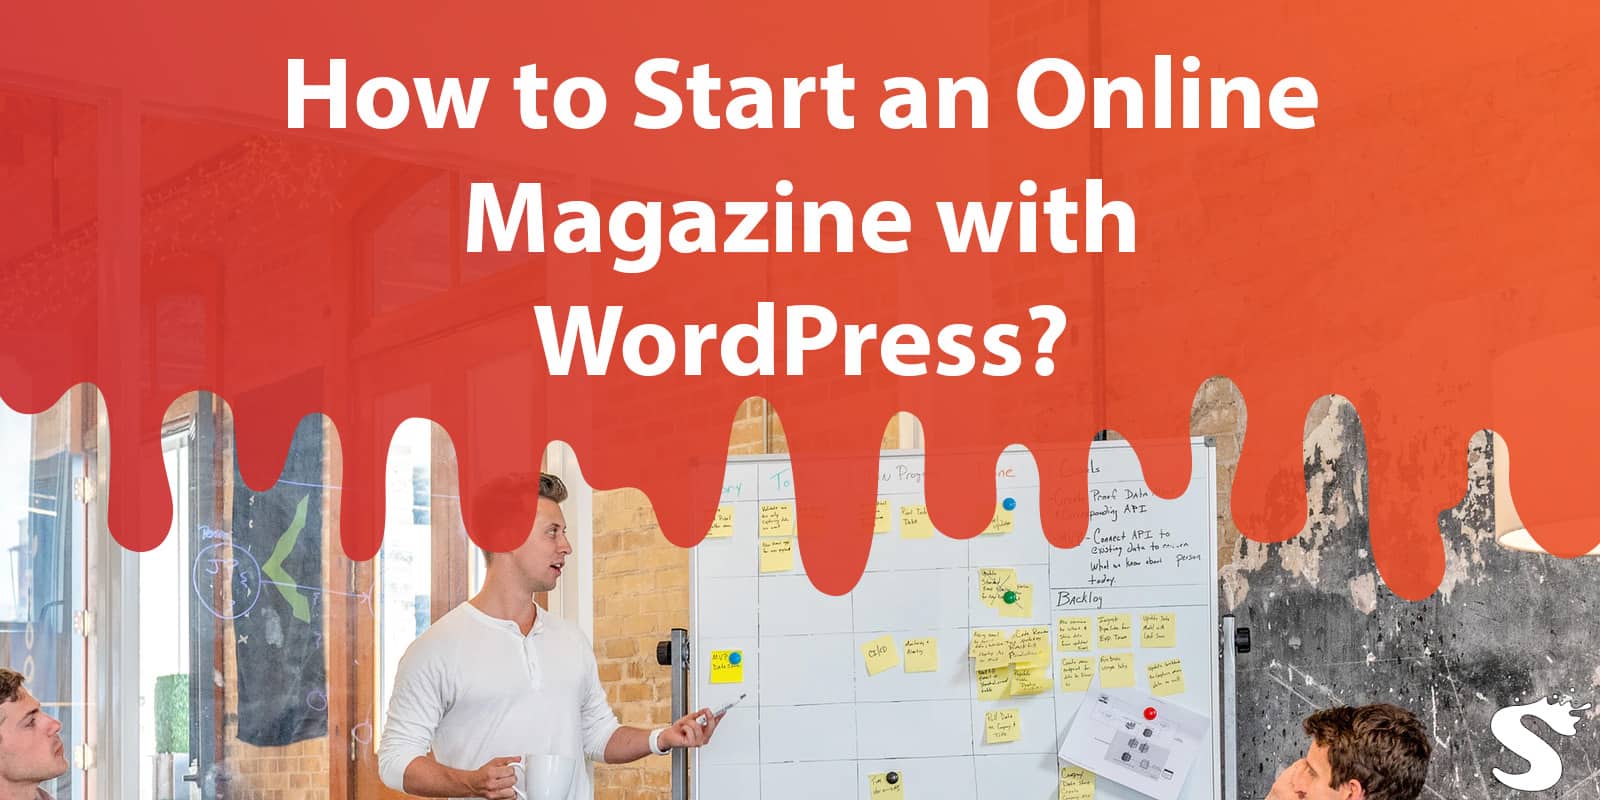 How to Start an Online Magazine with WordPress?